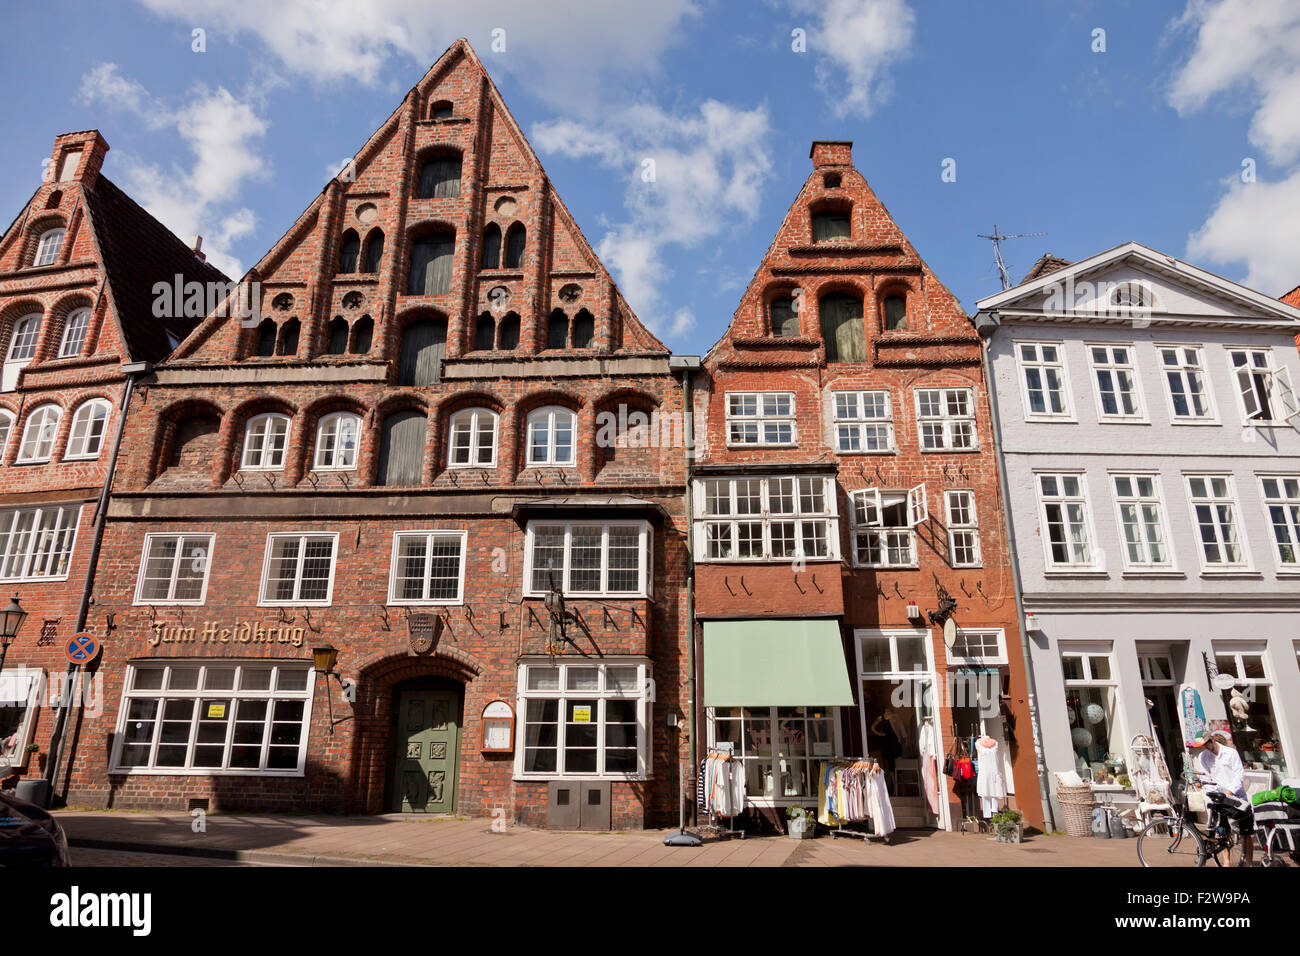 Gabled houses  in the historic centre, Hanseatic city of Lüneburg, Lower Saxony, Germany, Europe Stock Photo